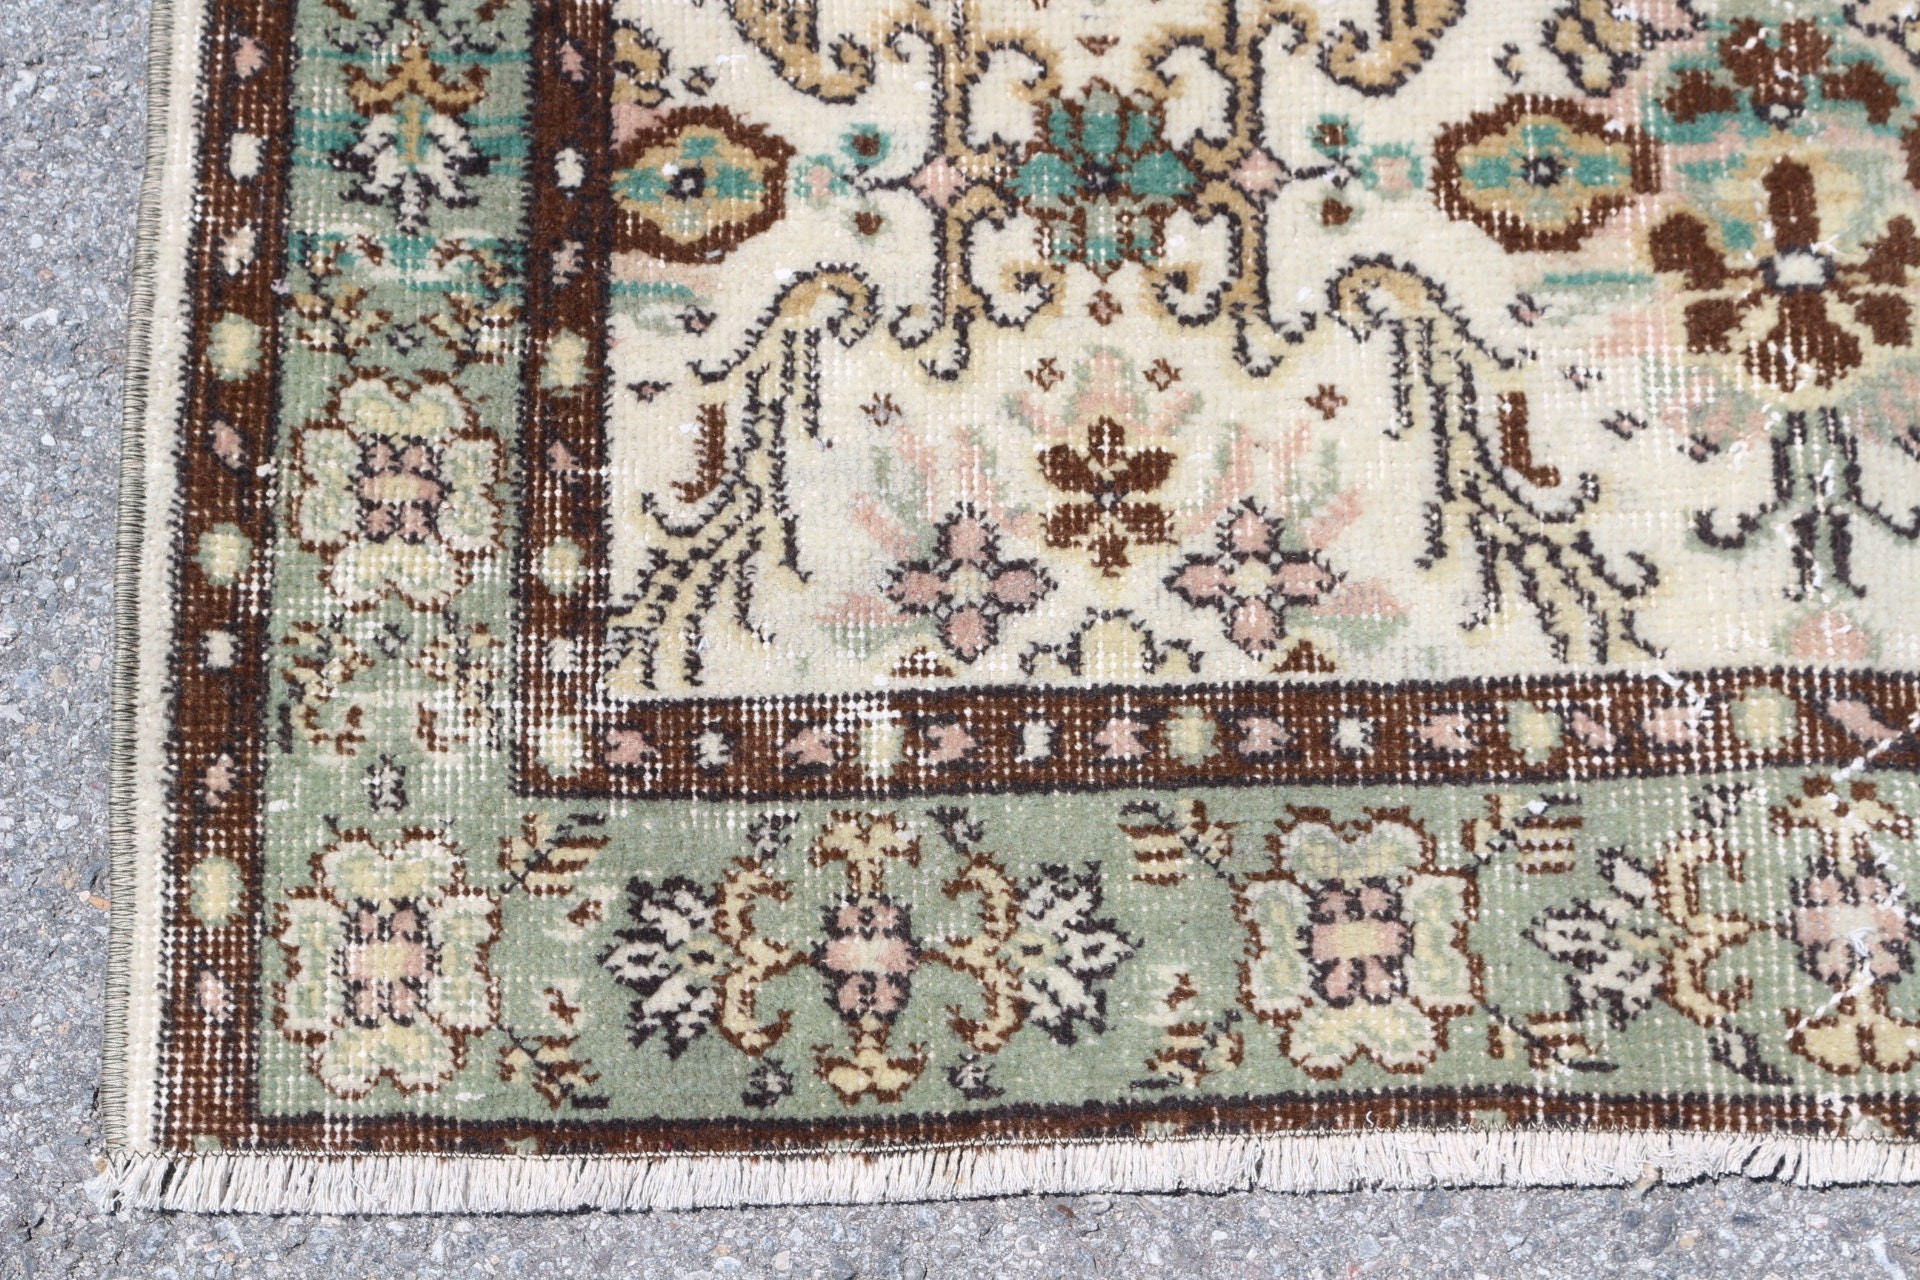 3.6x6.7 ft Area Rug, Turkish Rugs, Brown Bedroom Rug, Moroccan Rug, Vintage Rug, Home Decor Rugs, Dining Room Rugs, Rugs for Kitchen